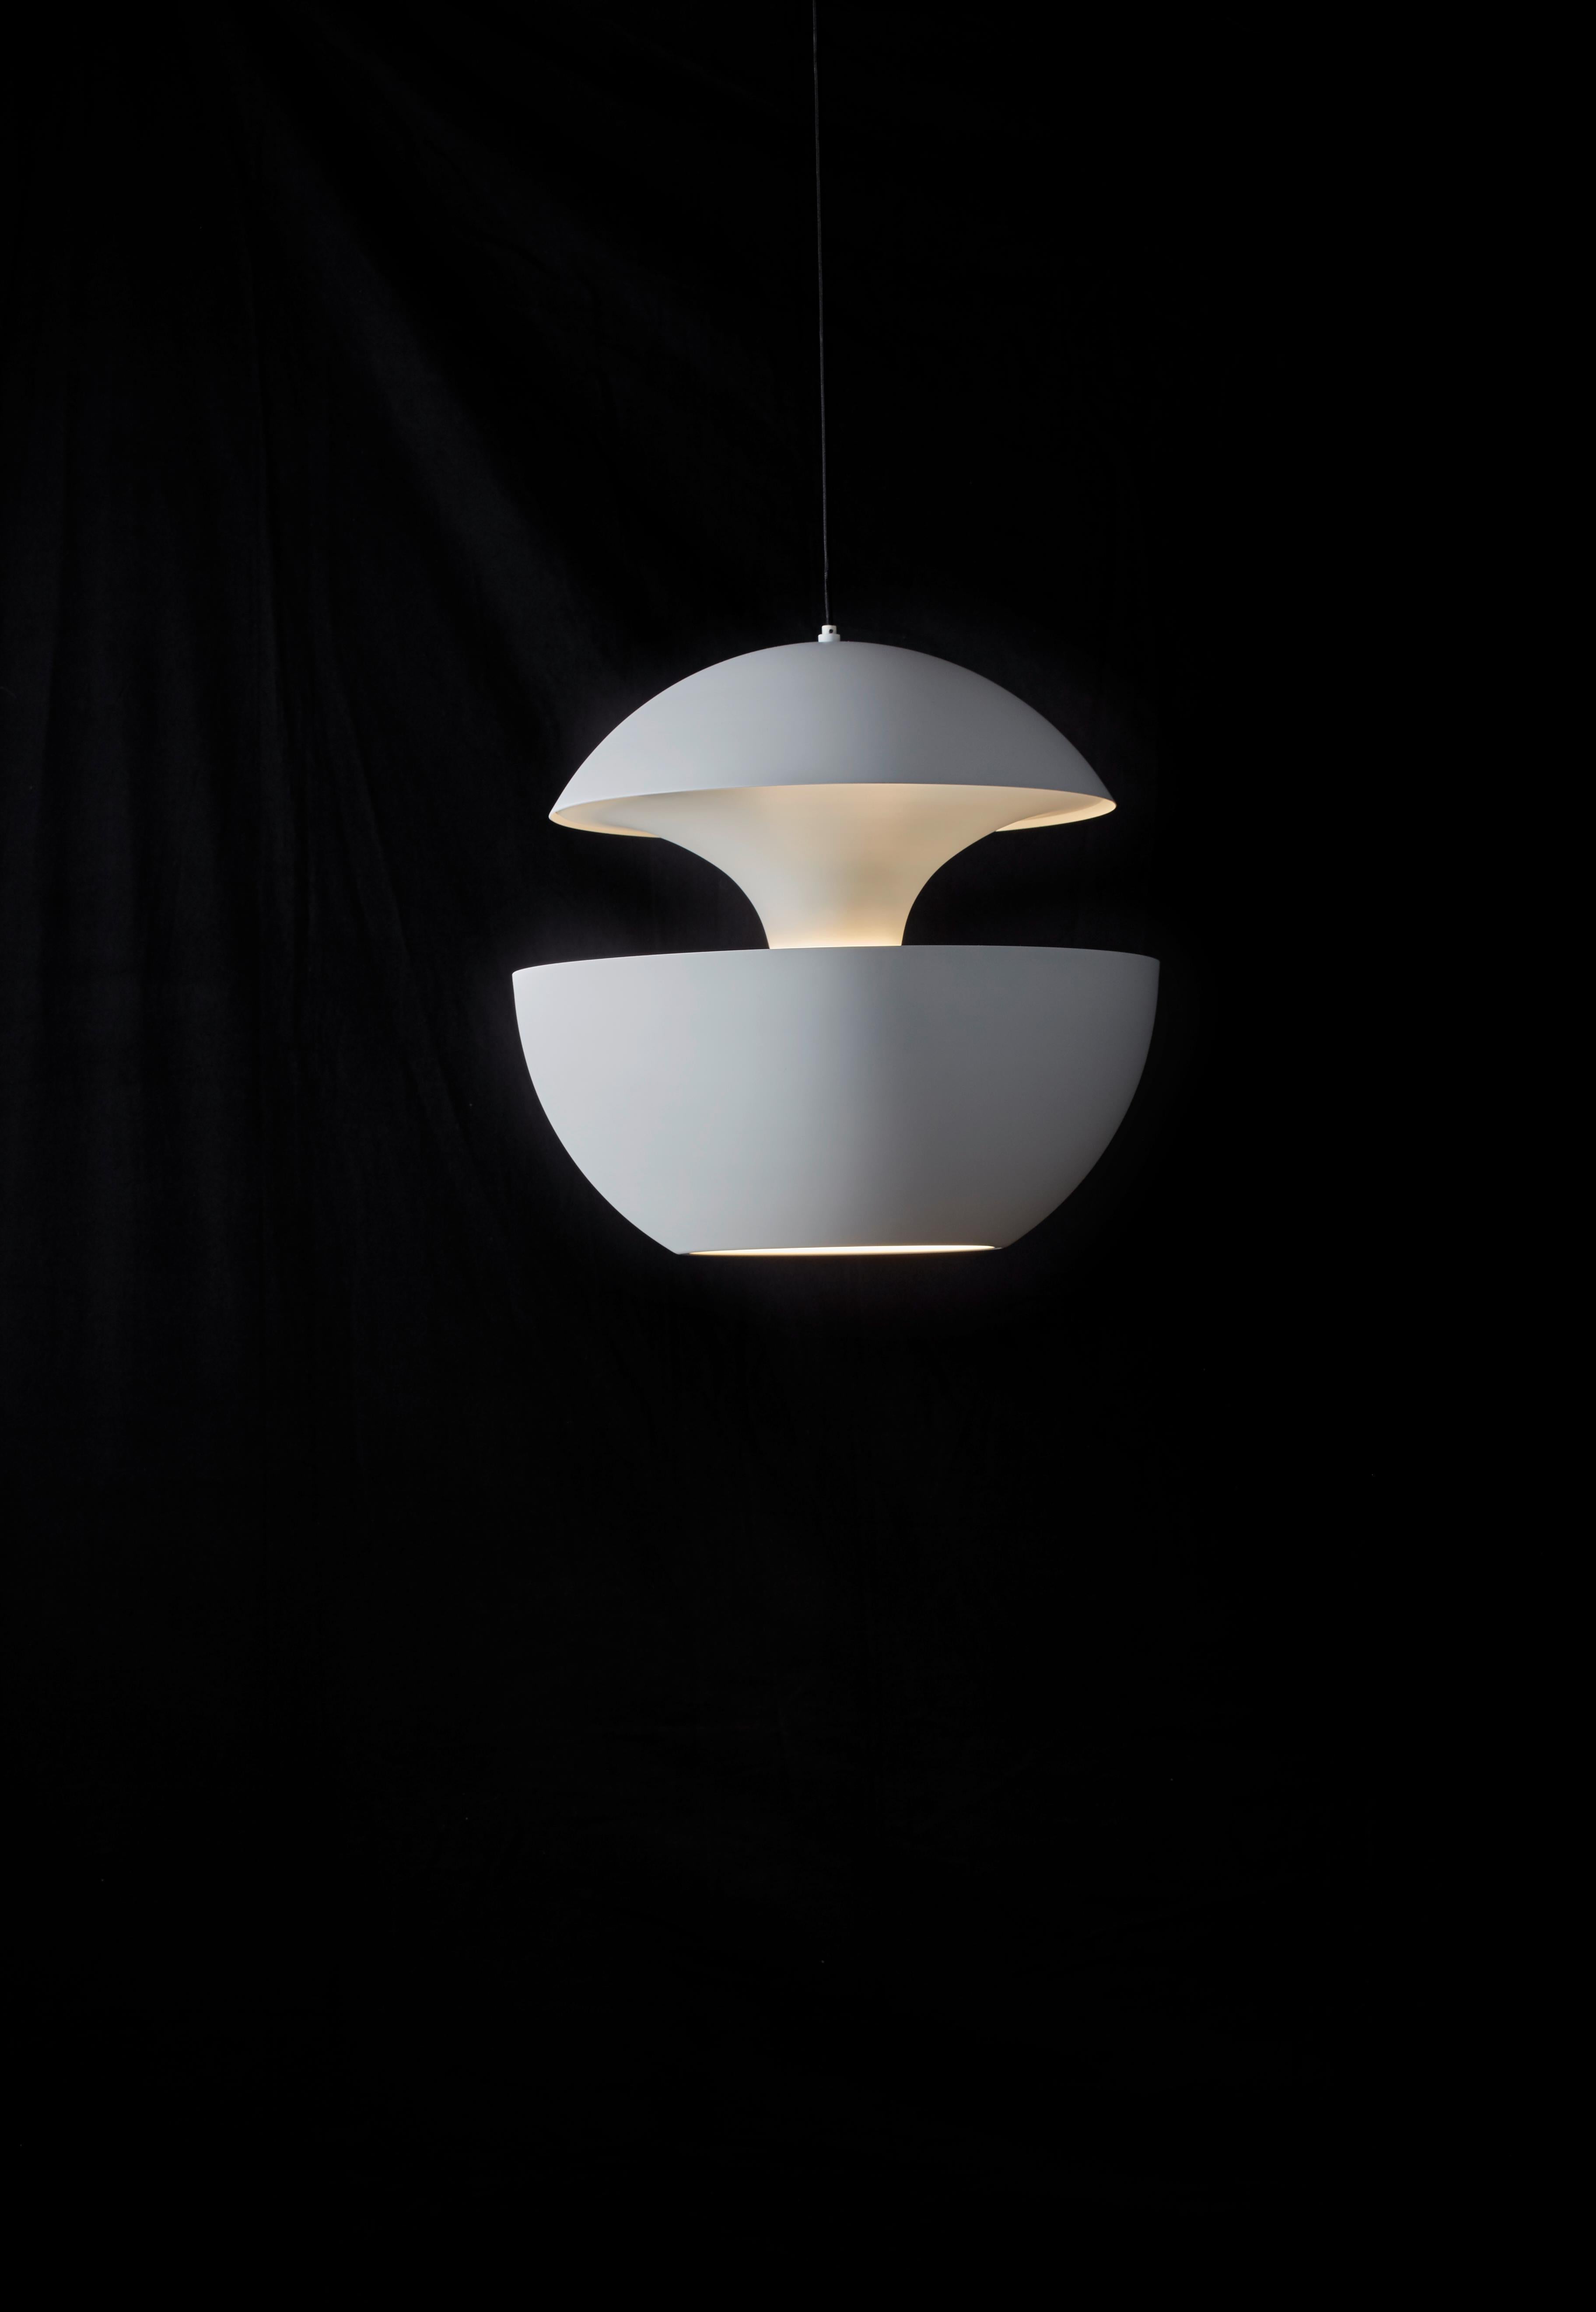 Here comes the sun medium white pendant lamp by Bertrand Balas
Dimensions: D 25 x H 25 cm
Materials: Aluminum
Available in different sizes and colors.

All our lamps can be wired according to each country. If sold to the USA it will be wired